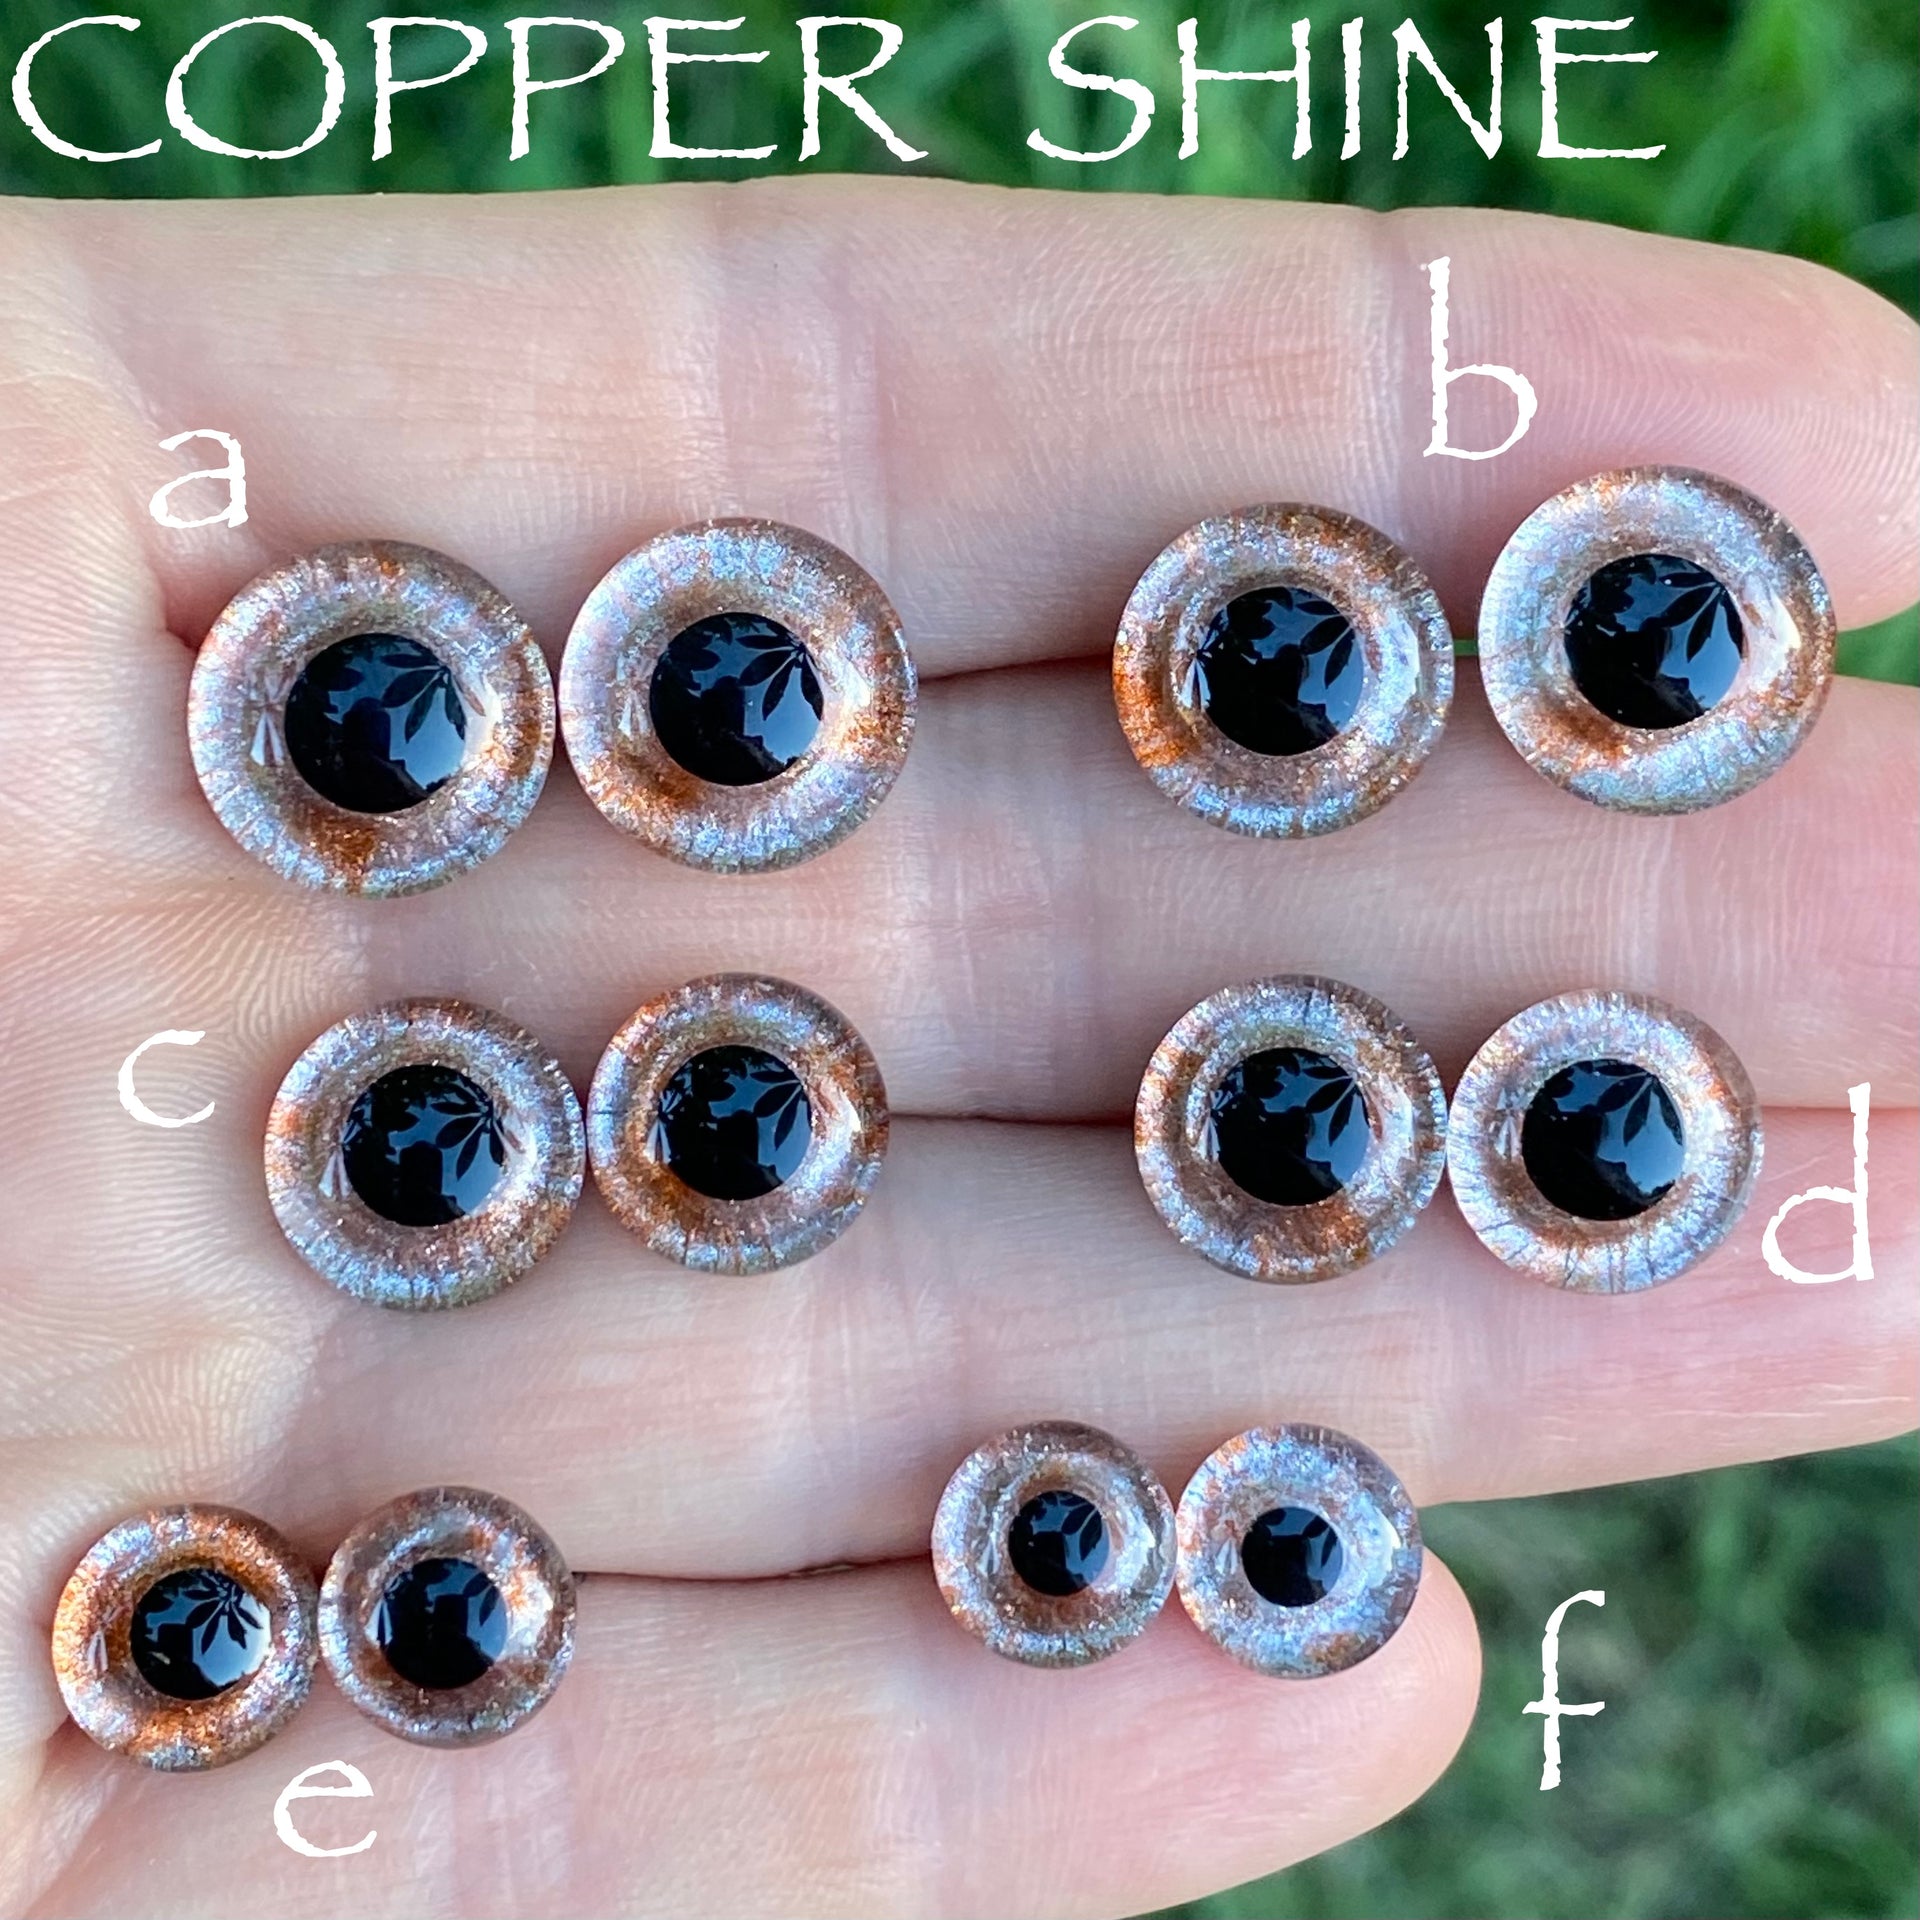 Hand Painted Eyes - Copper Shine